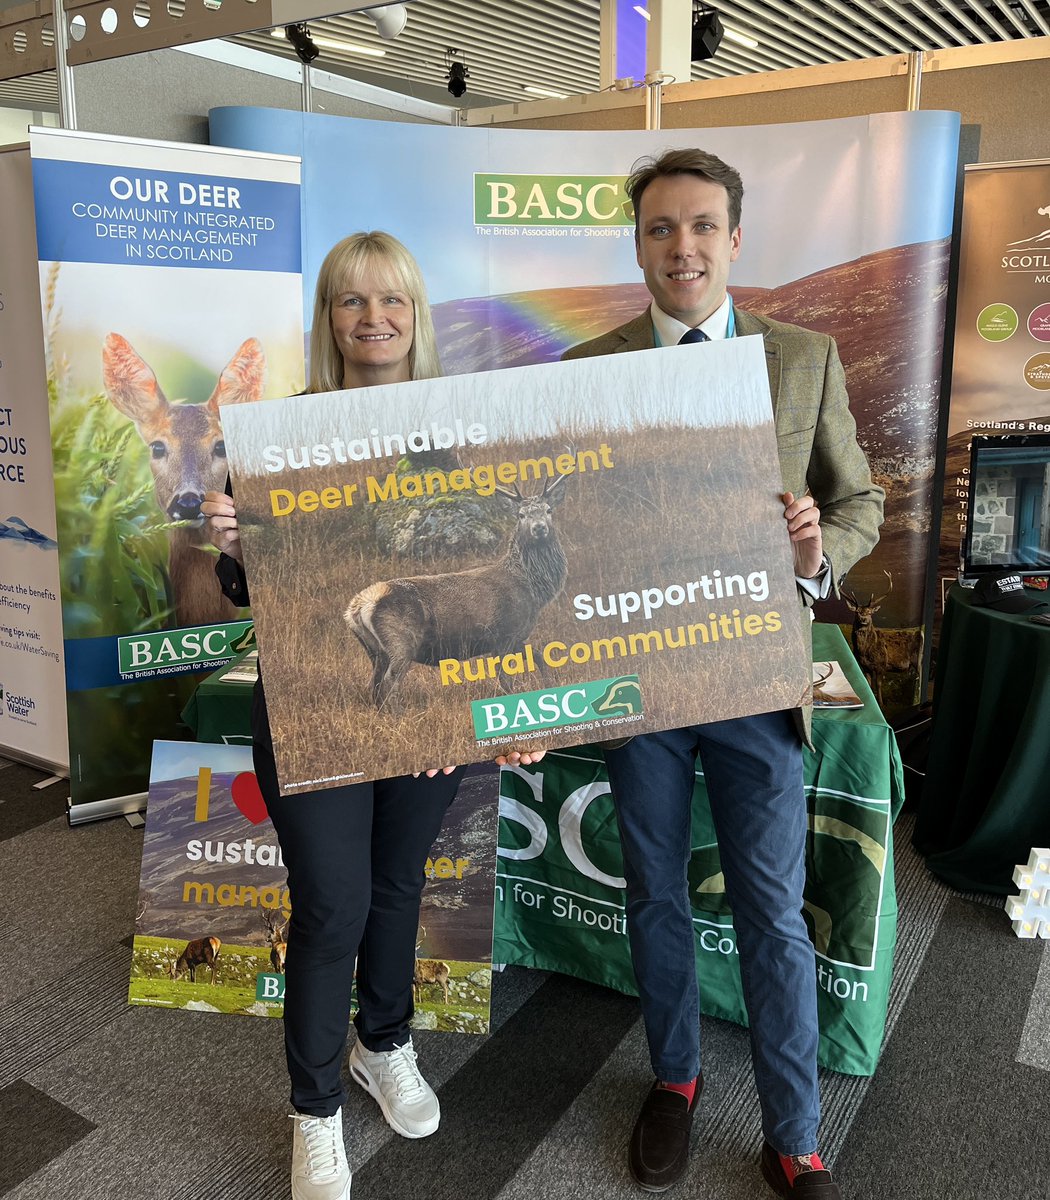 We are looking forward to holding a Parliamentary exhibition next week in @ScotParl to discuss sustainable deer management, kindly sponsored by @SharonDowey_ #SCC24